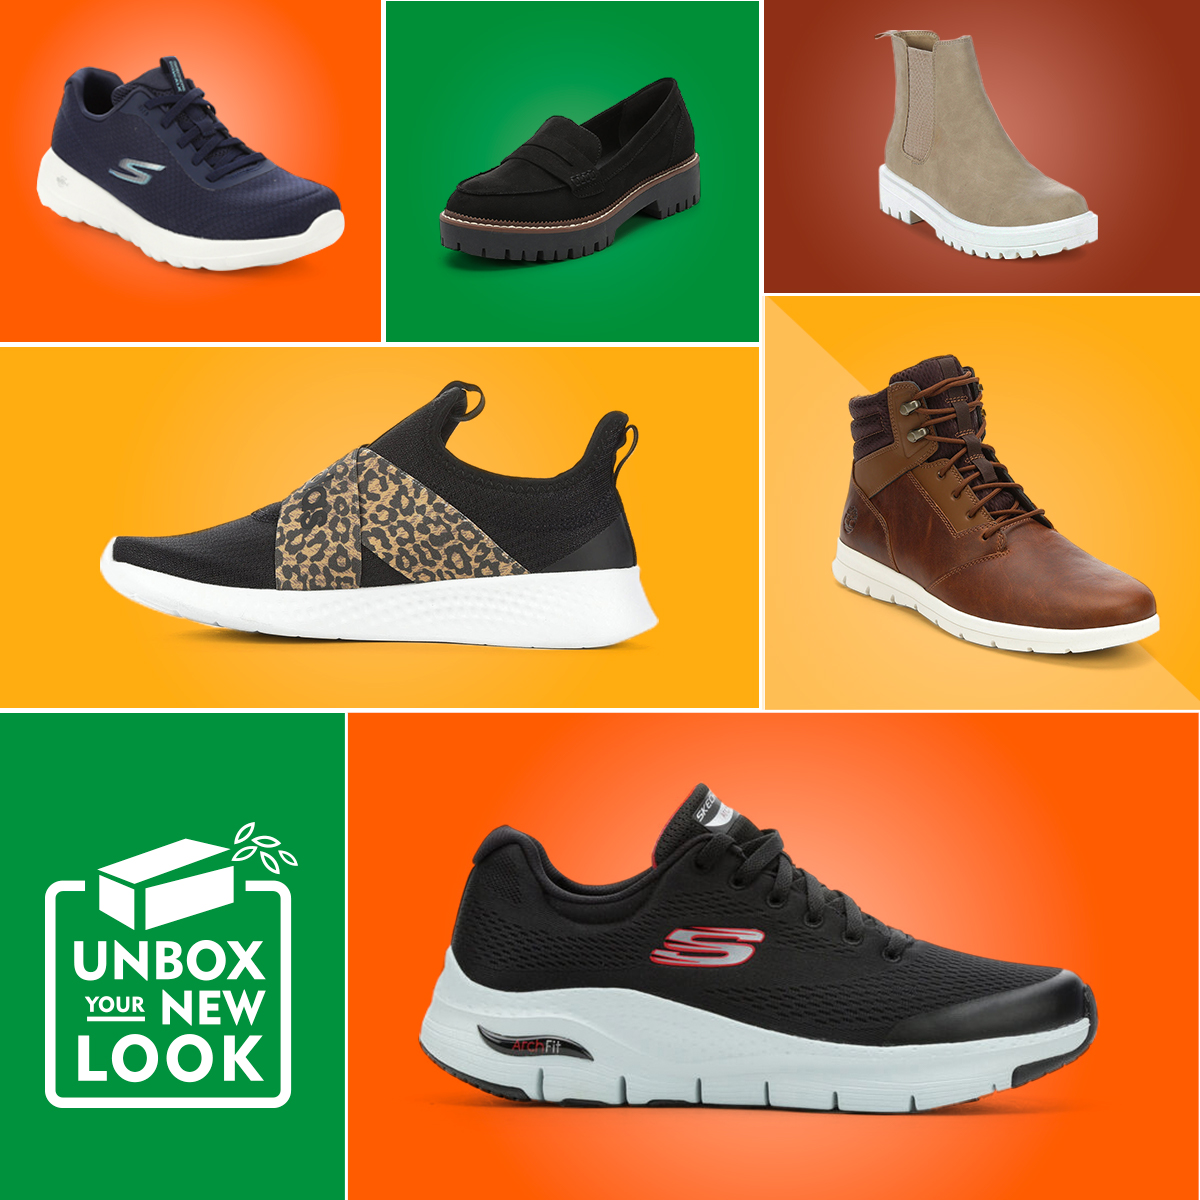 Unbox Your New Look! Shop the most comfortable shoes at Shoe Carnival.